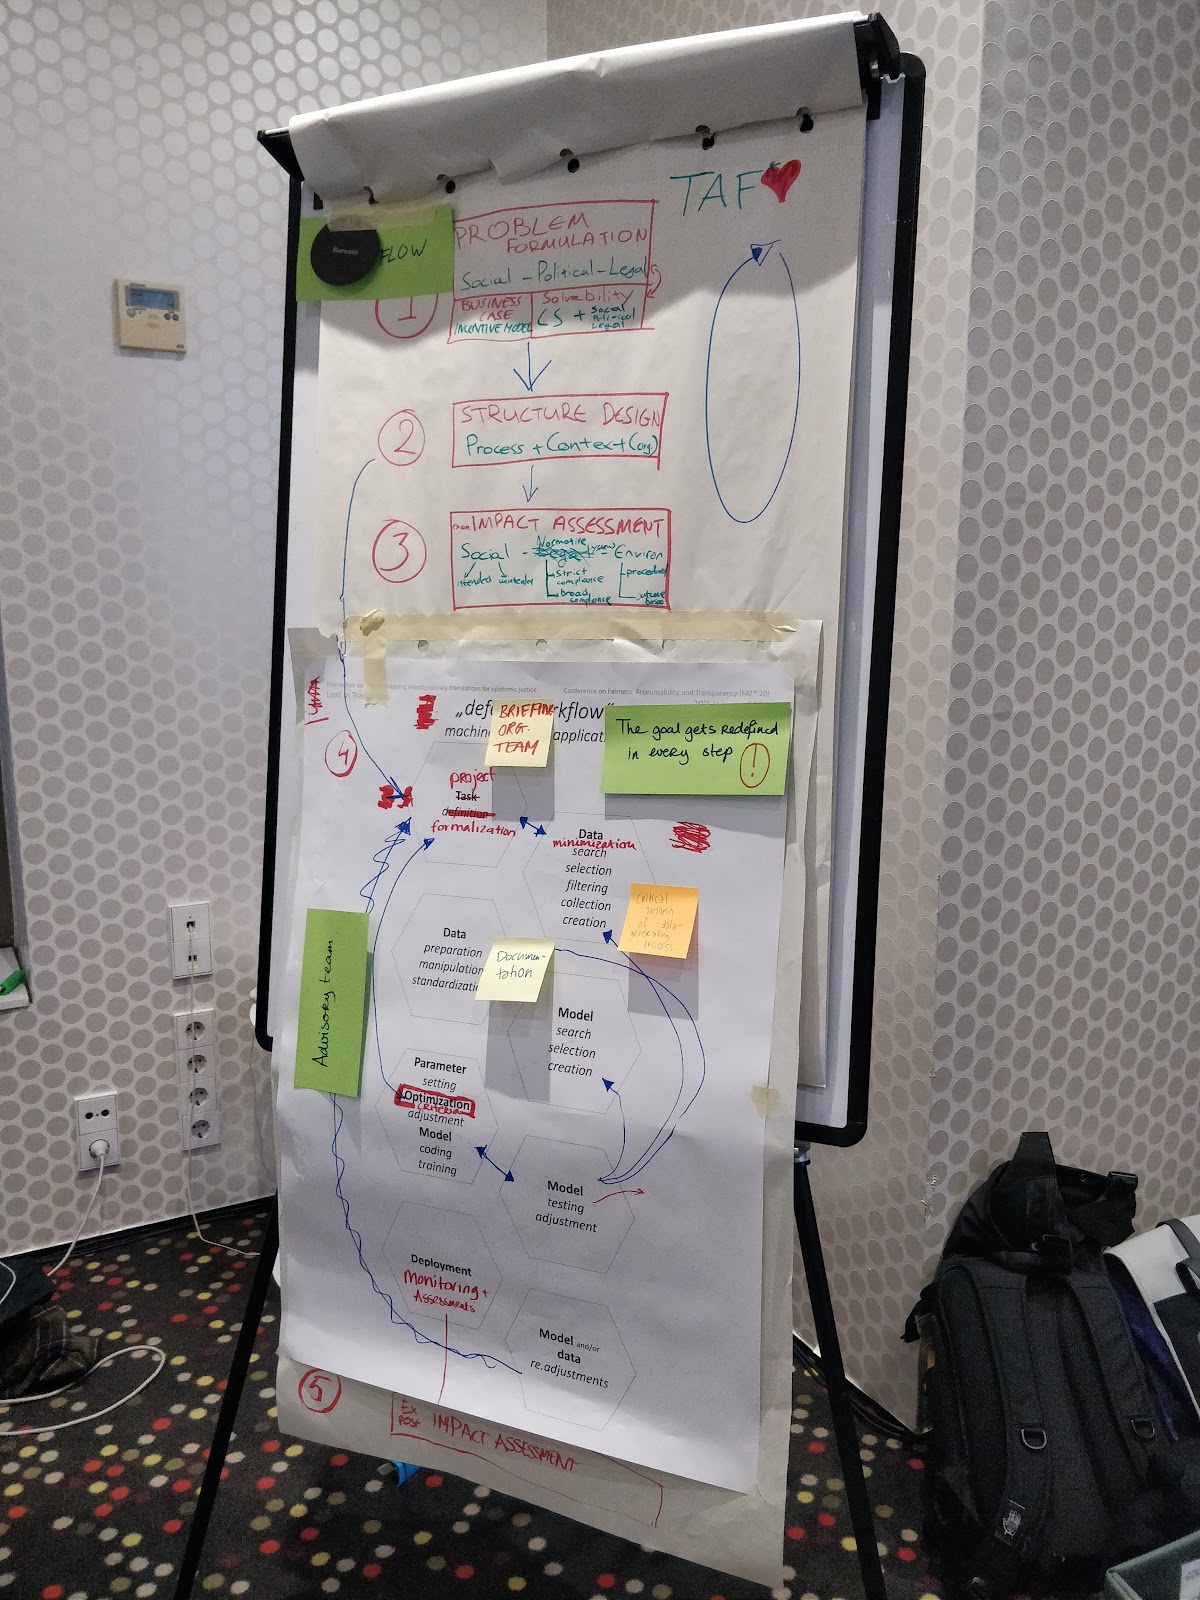 Reworked wofklow on a whiteboard of one of the participants group with additional stages on context, structure and impact assessement added to the prototypical workflow.